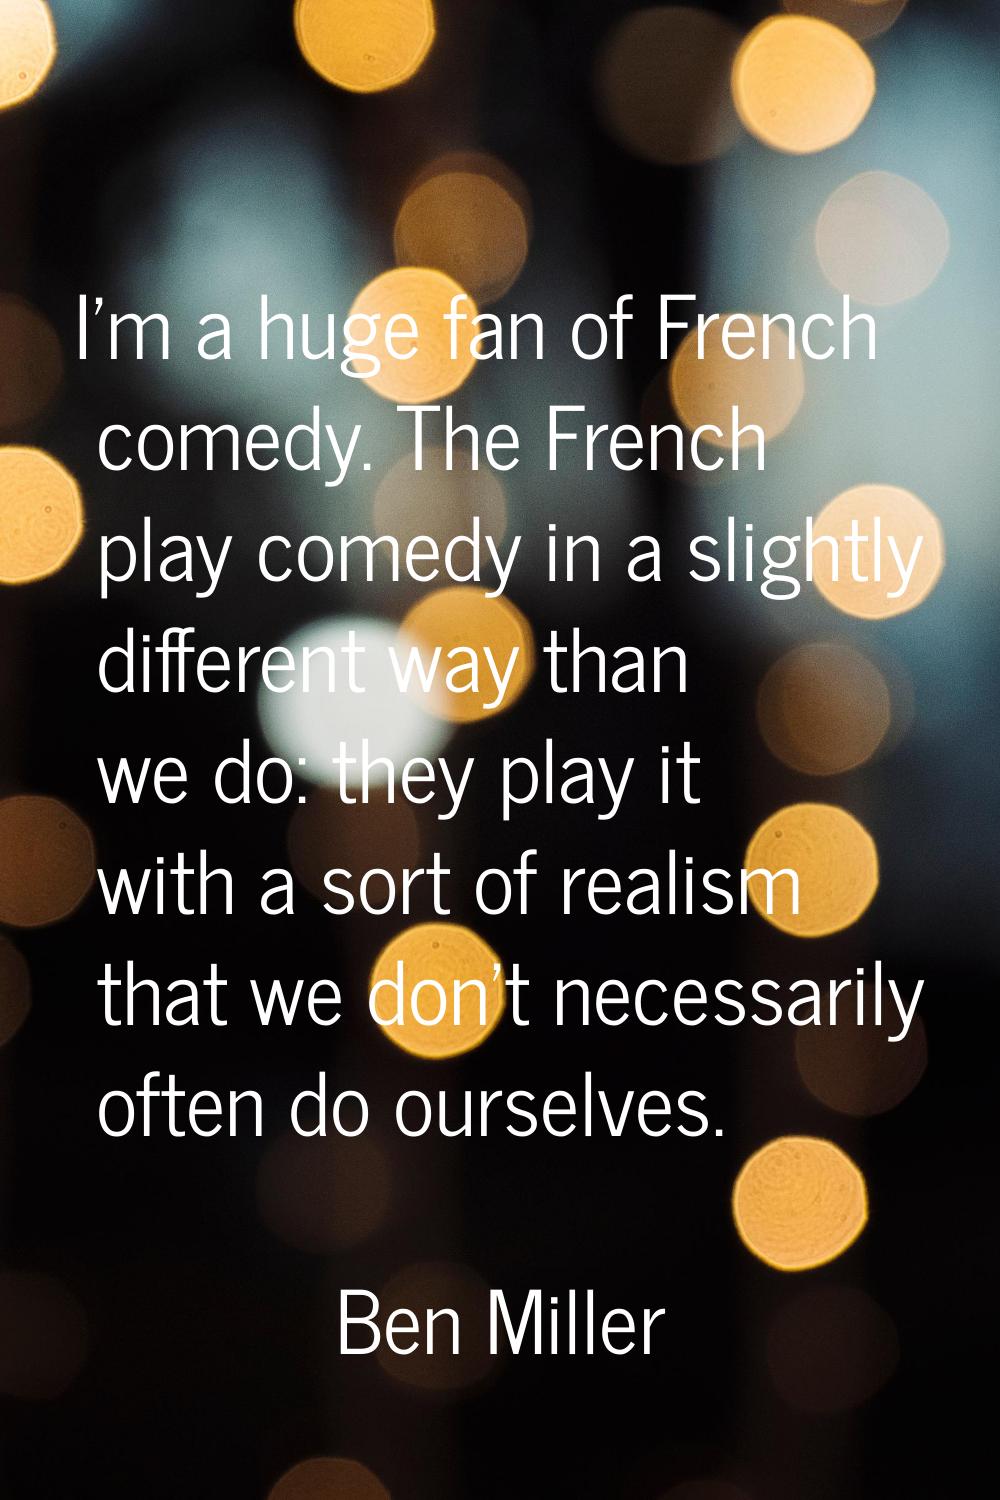 I'm a huge fan of French comedy. The French play comedy in a slightly different way than we do: the